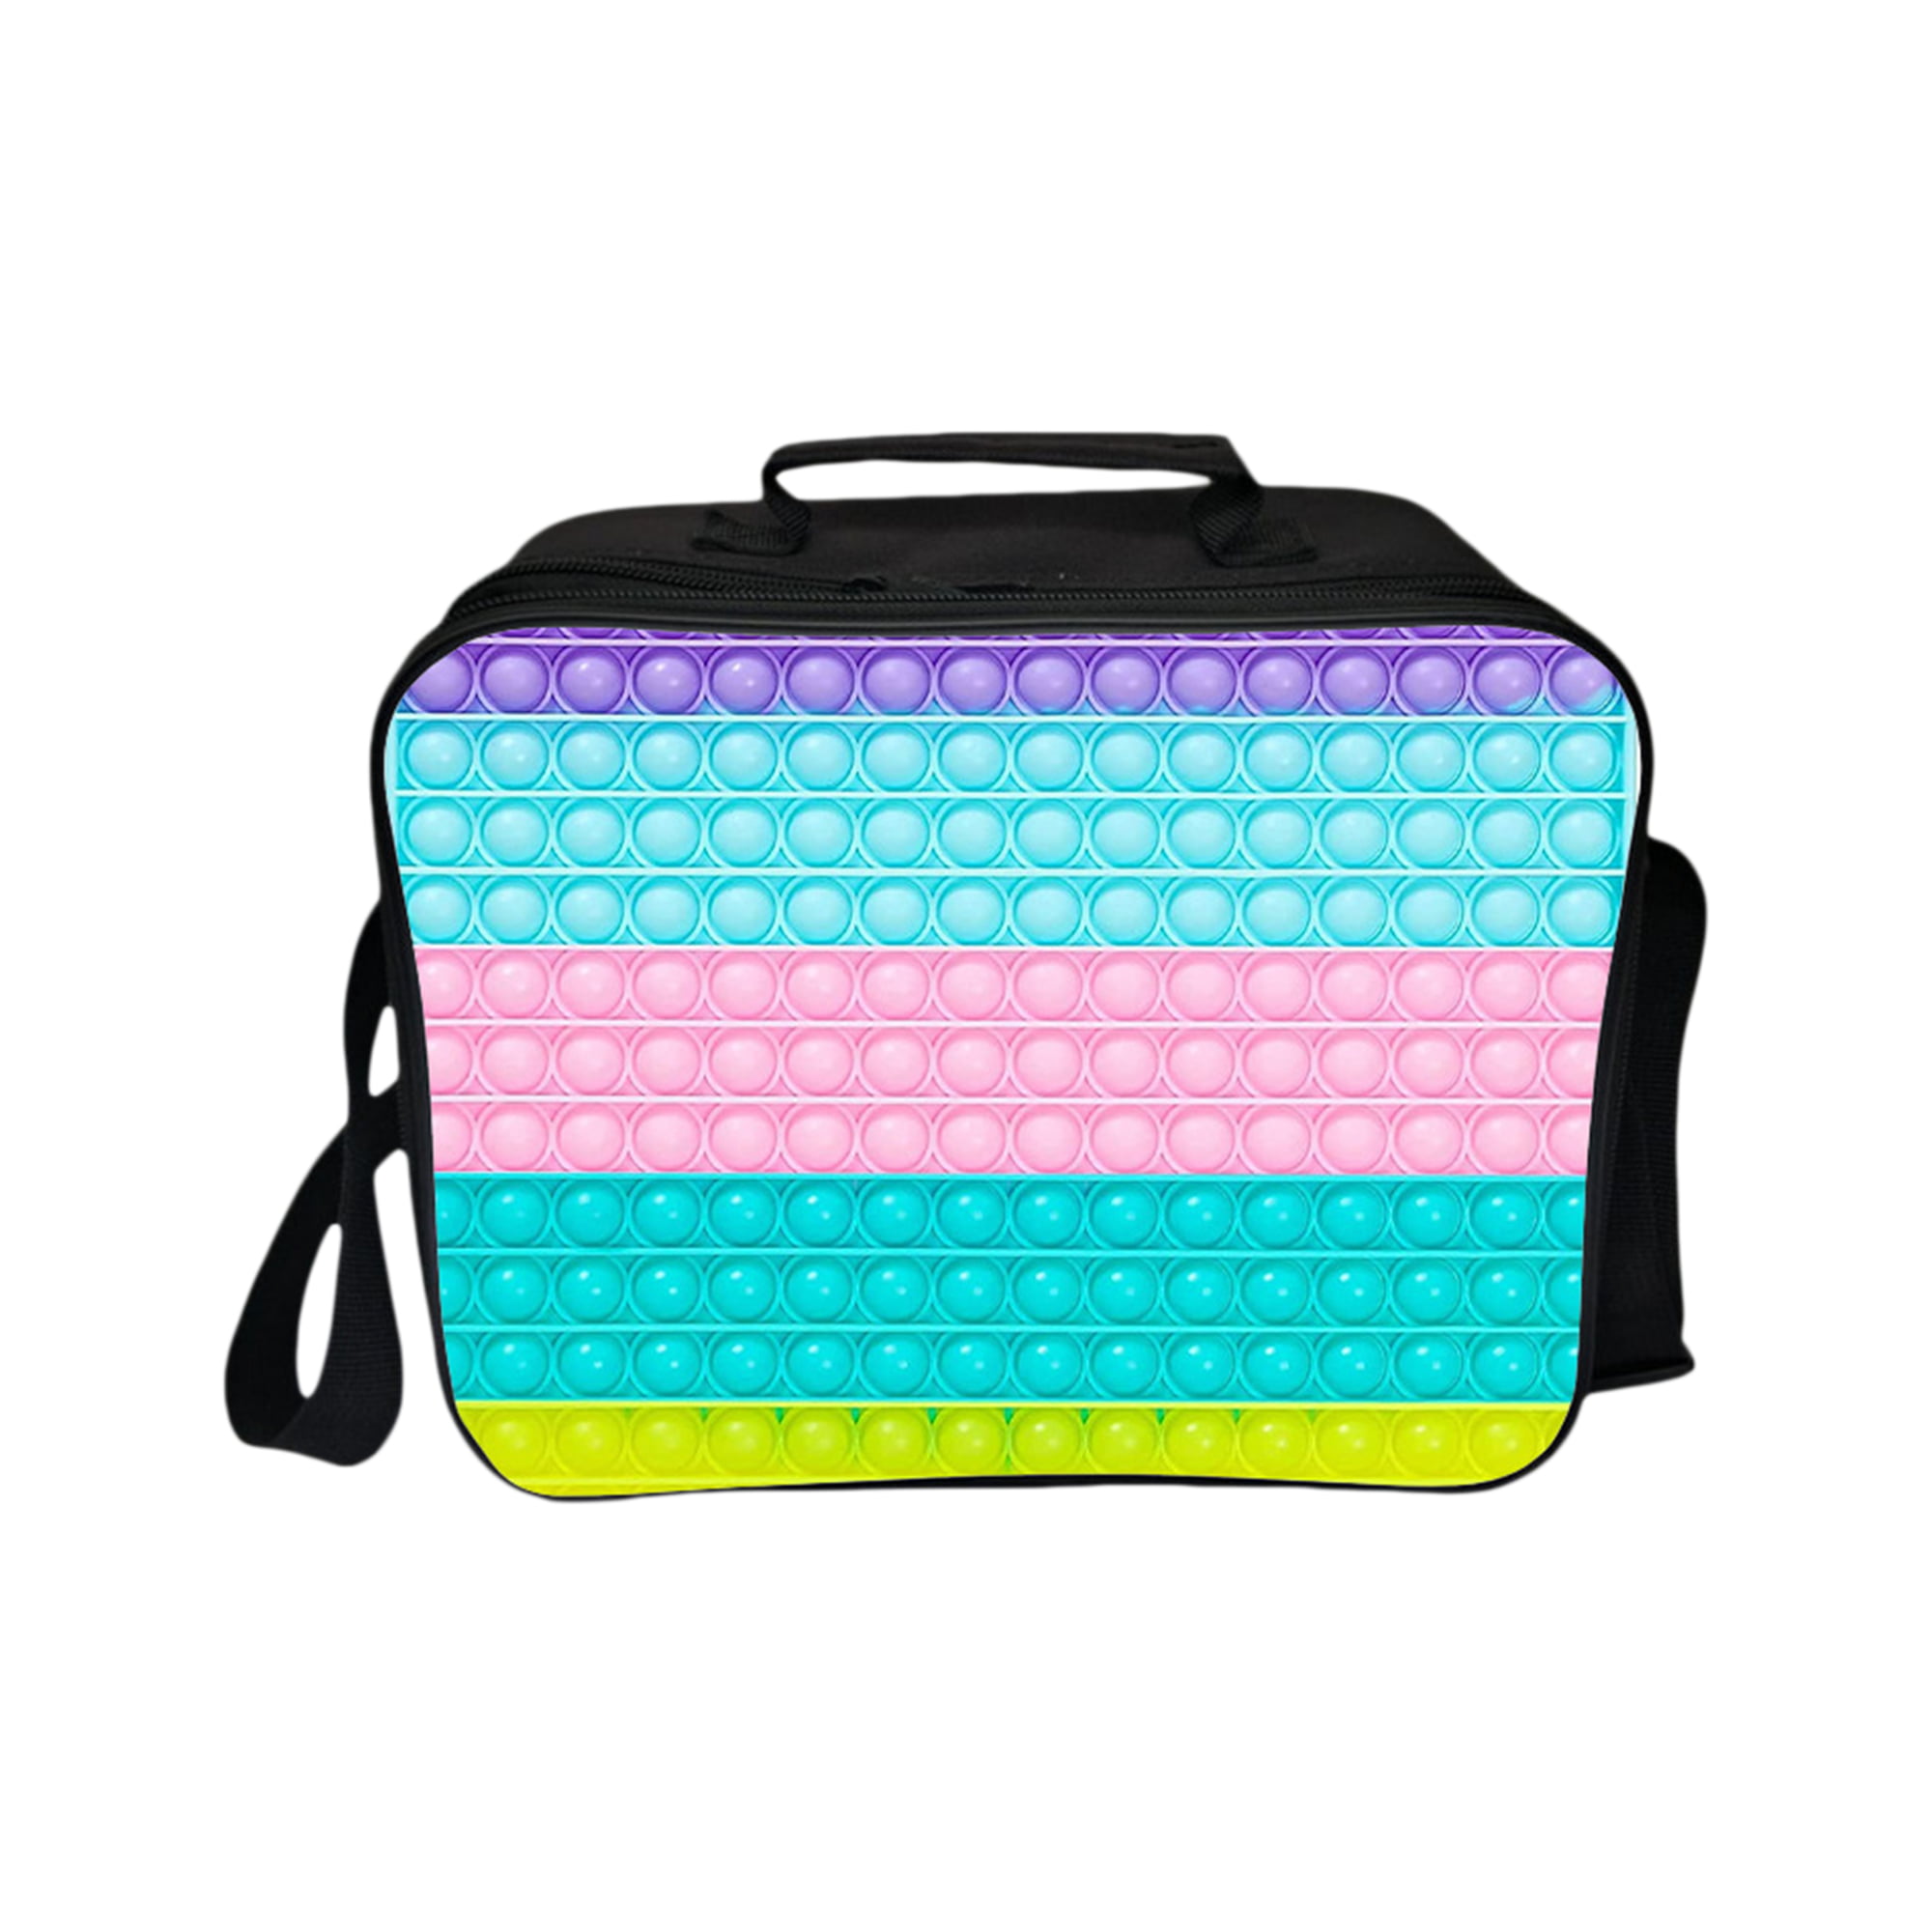 Pop Lunch Box Fidget Toy for Boys Girls,Insulated Lunch Bag, Lunch Large  Tote Bag for School Office, Christmas Leakproof Cooler Lunch Box with  Adjustable Shoulder Strap 